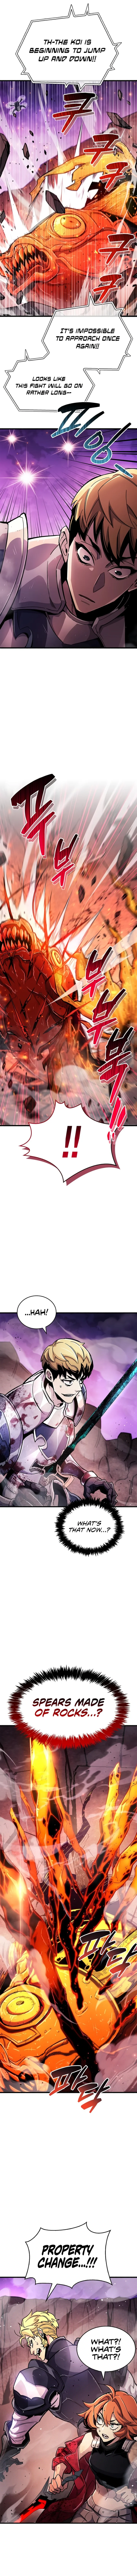 The Player Hides His Past - Chapter 24 Page 4